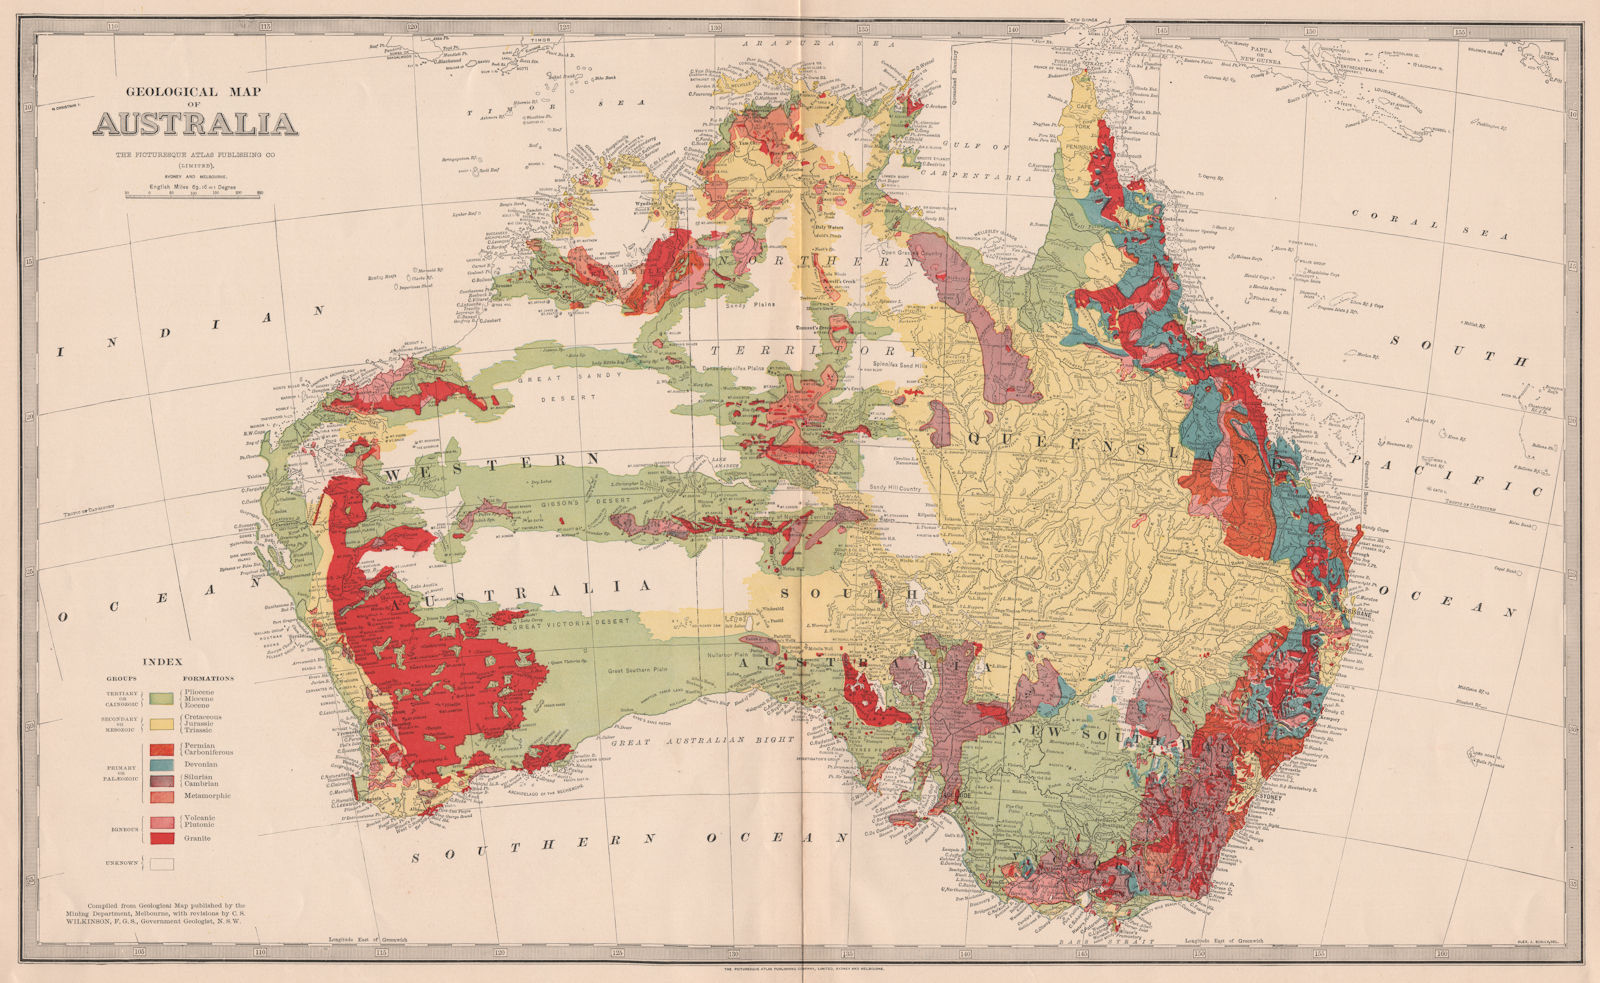 Large 'GEOLOGICAL MAP OF AUSTRALIA' by WILKINSON for GARRAN 1888 old